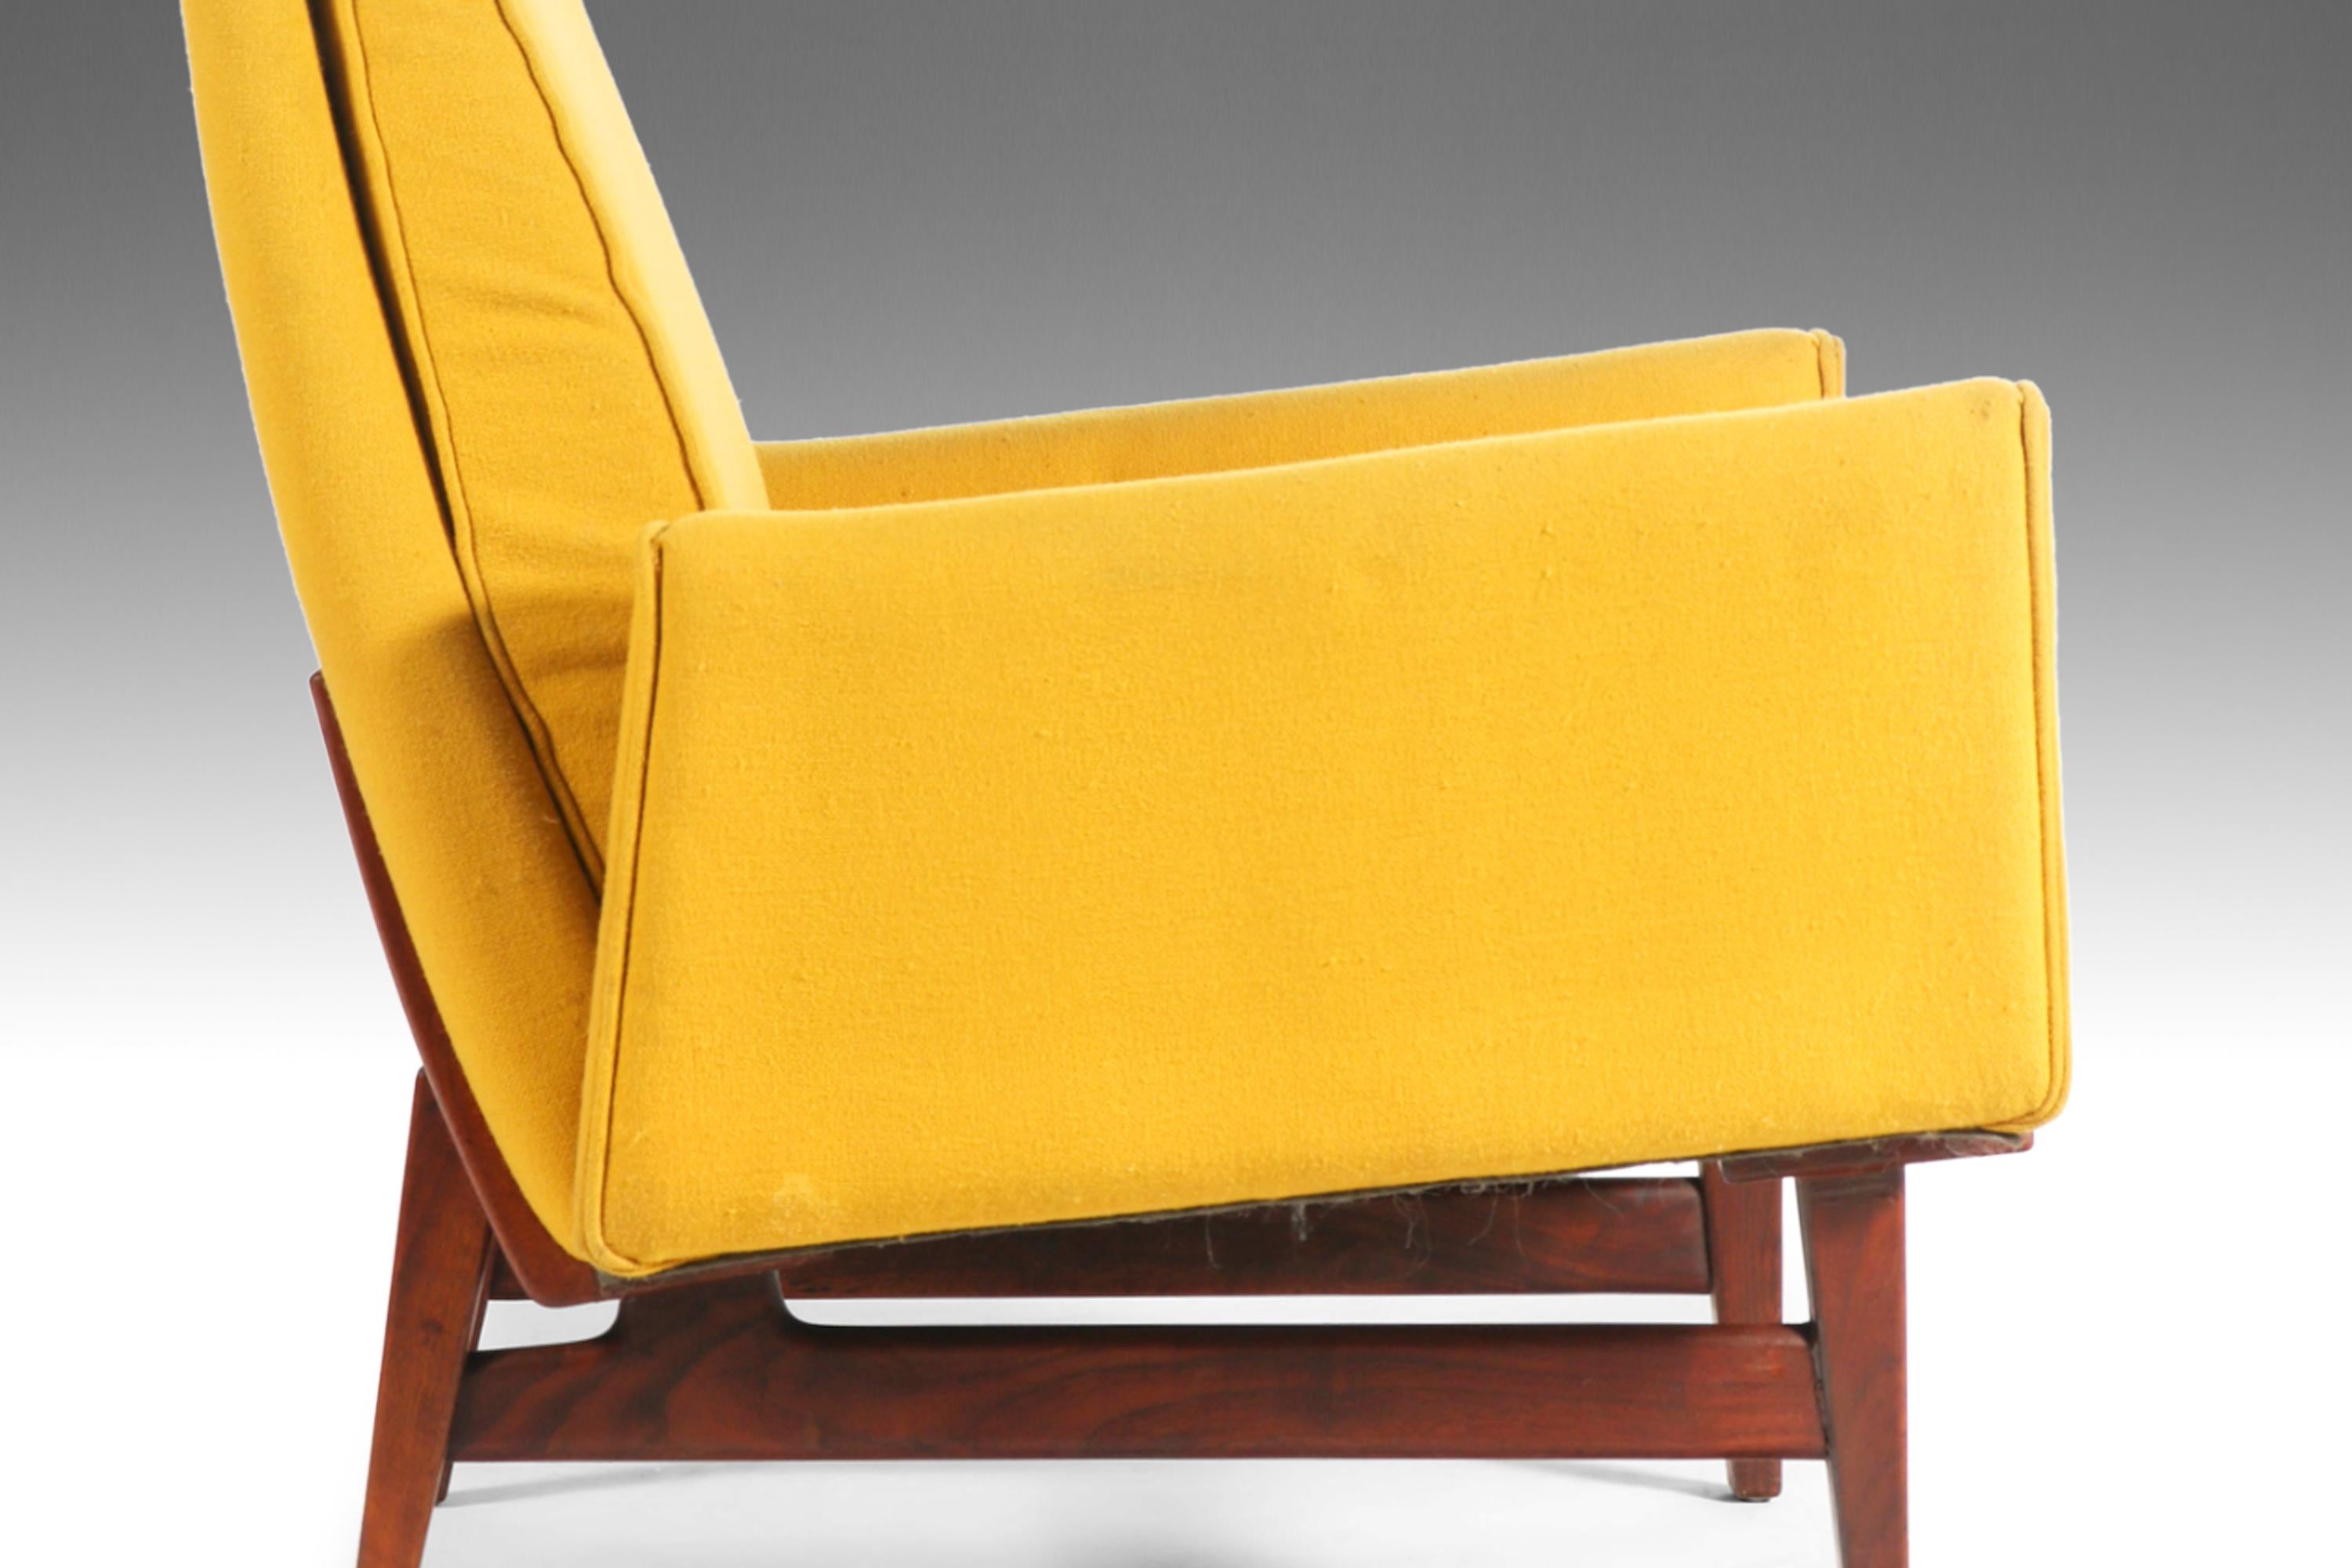 Jens Risom Model No. 2118 Walnut Lounge Chair in Original Upholstery, c. 1960's For Sale 4